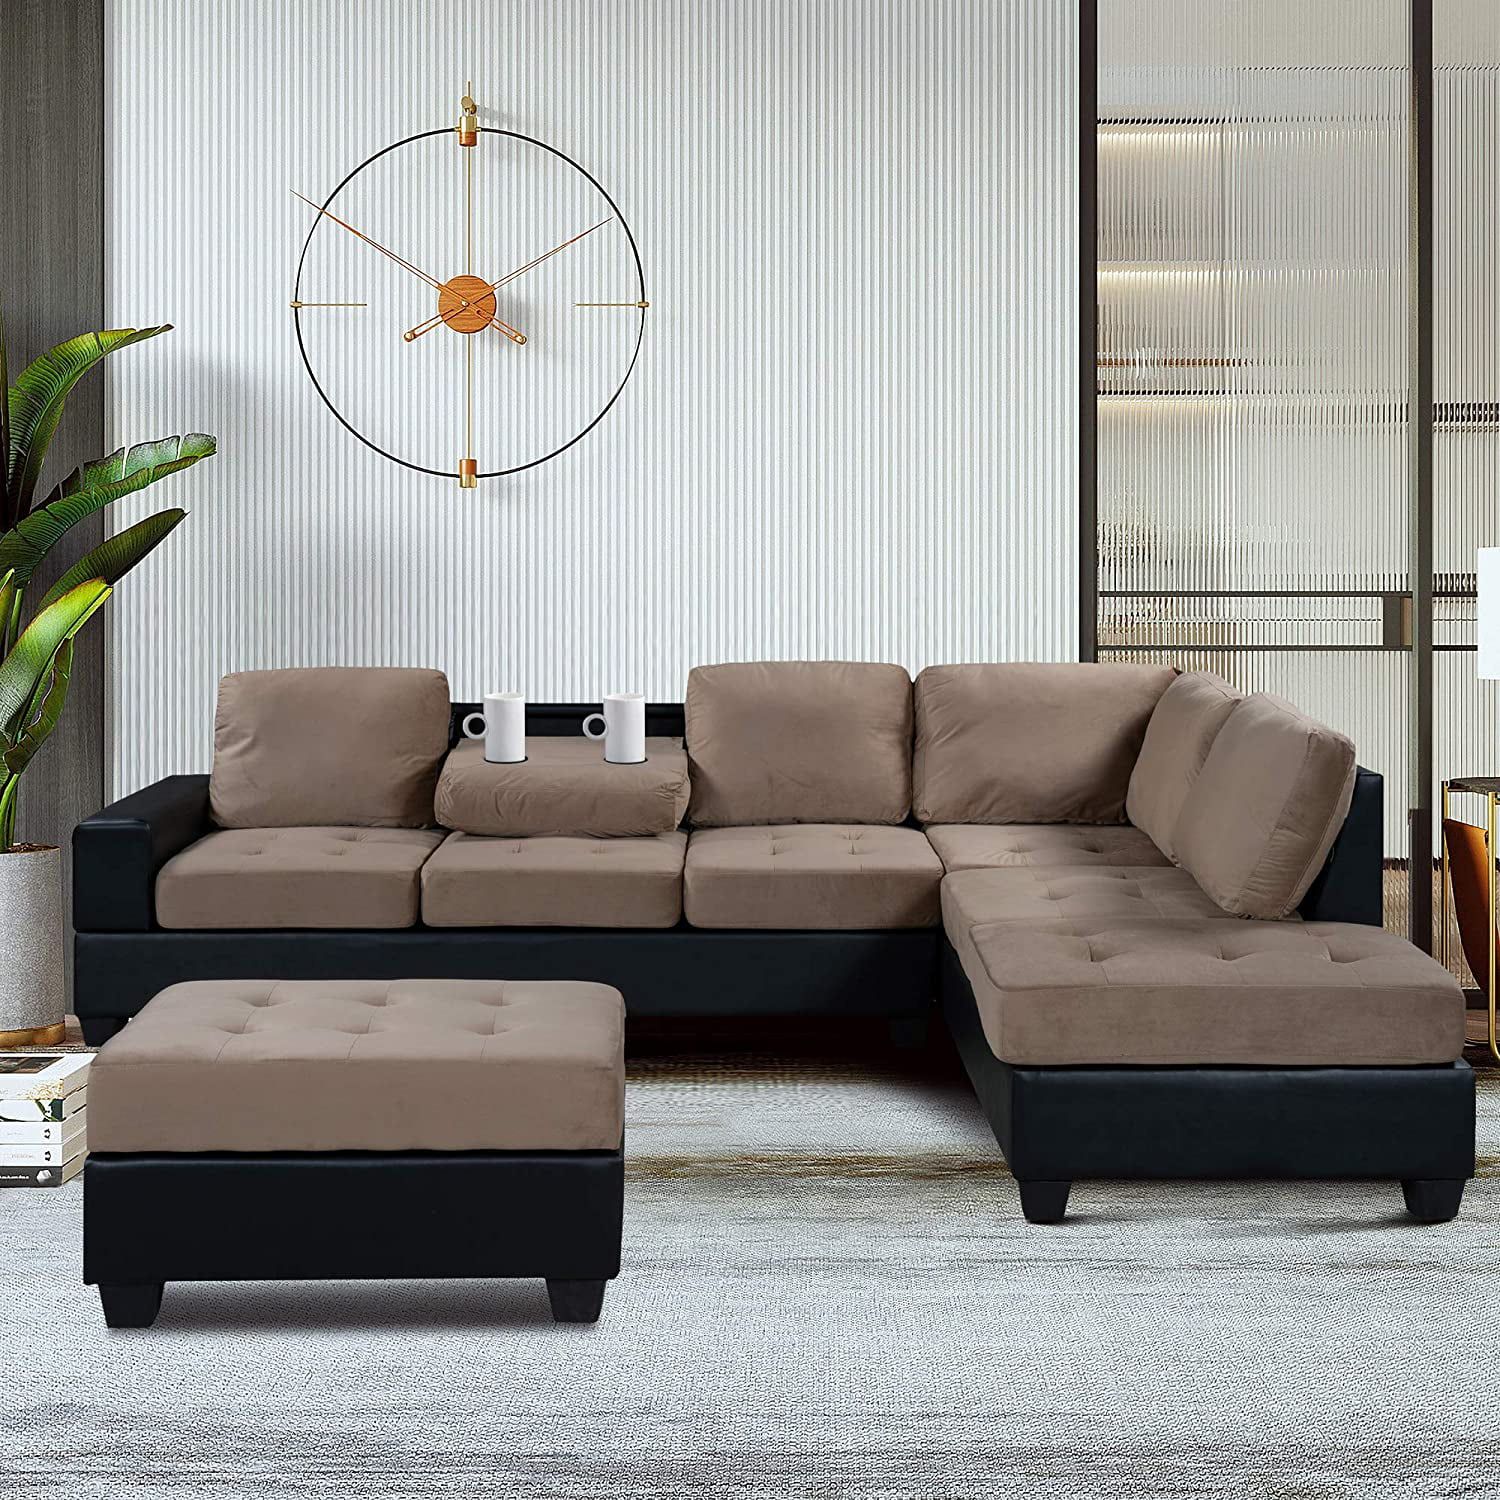 3 Piece Convertible Sectional Sofa L Shaped Couch With Reversible Intended For 3 Seat Convertible Sectional Sofas (View 12 of 20)